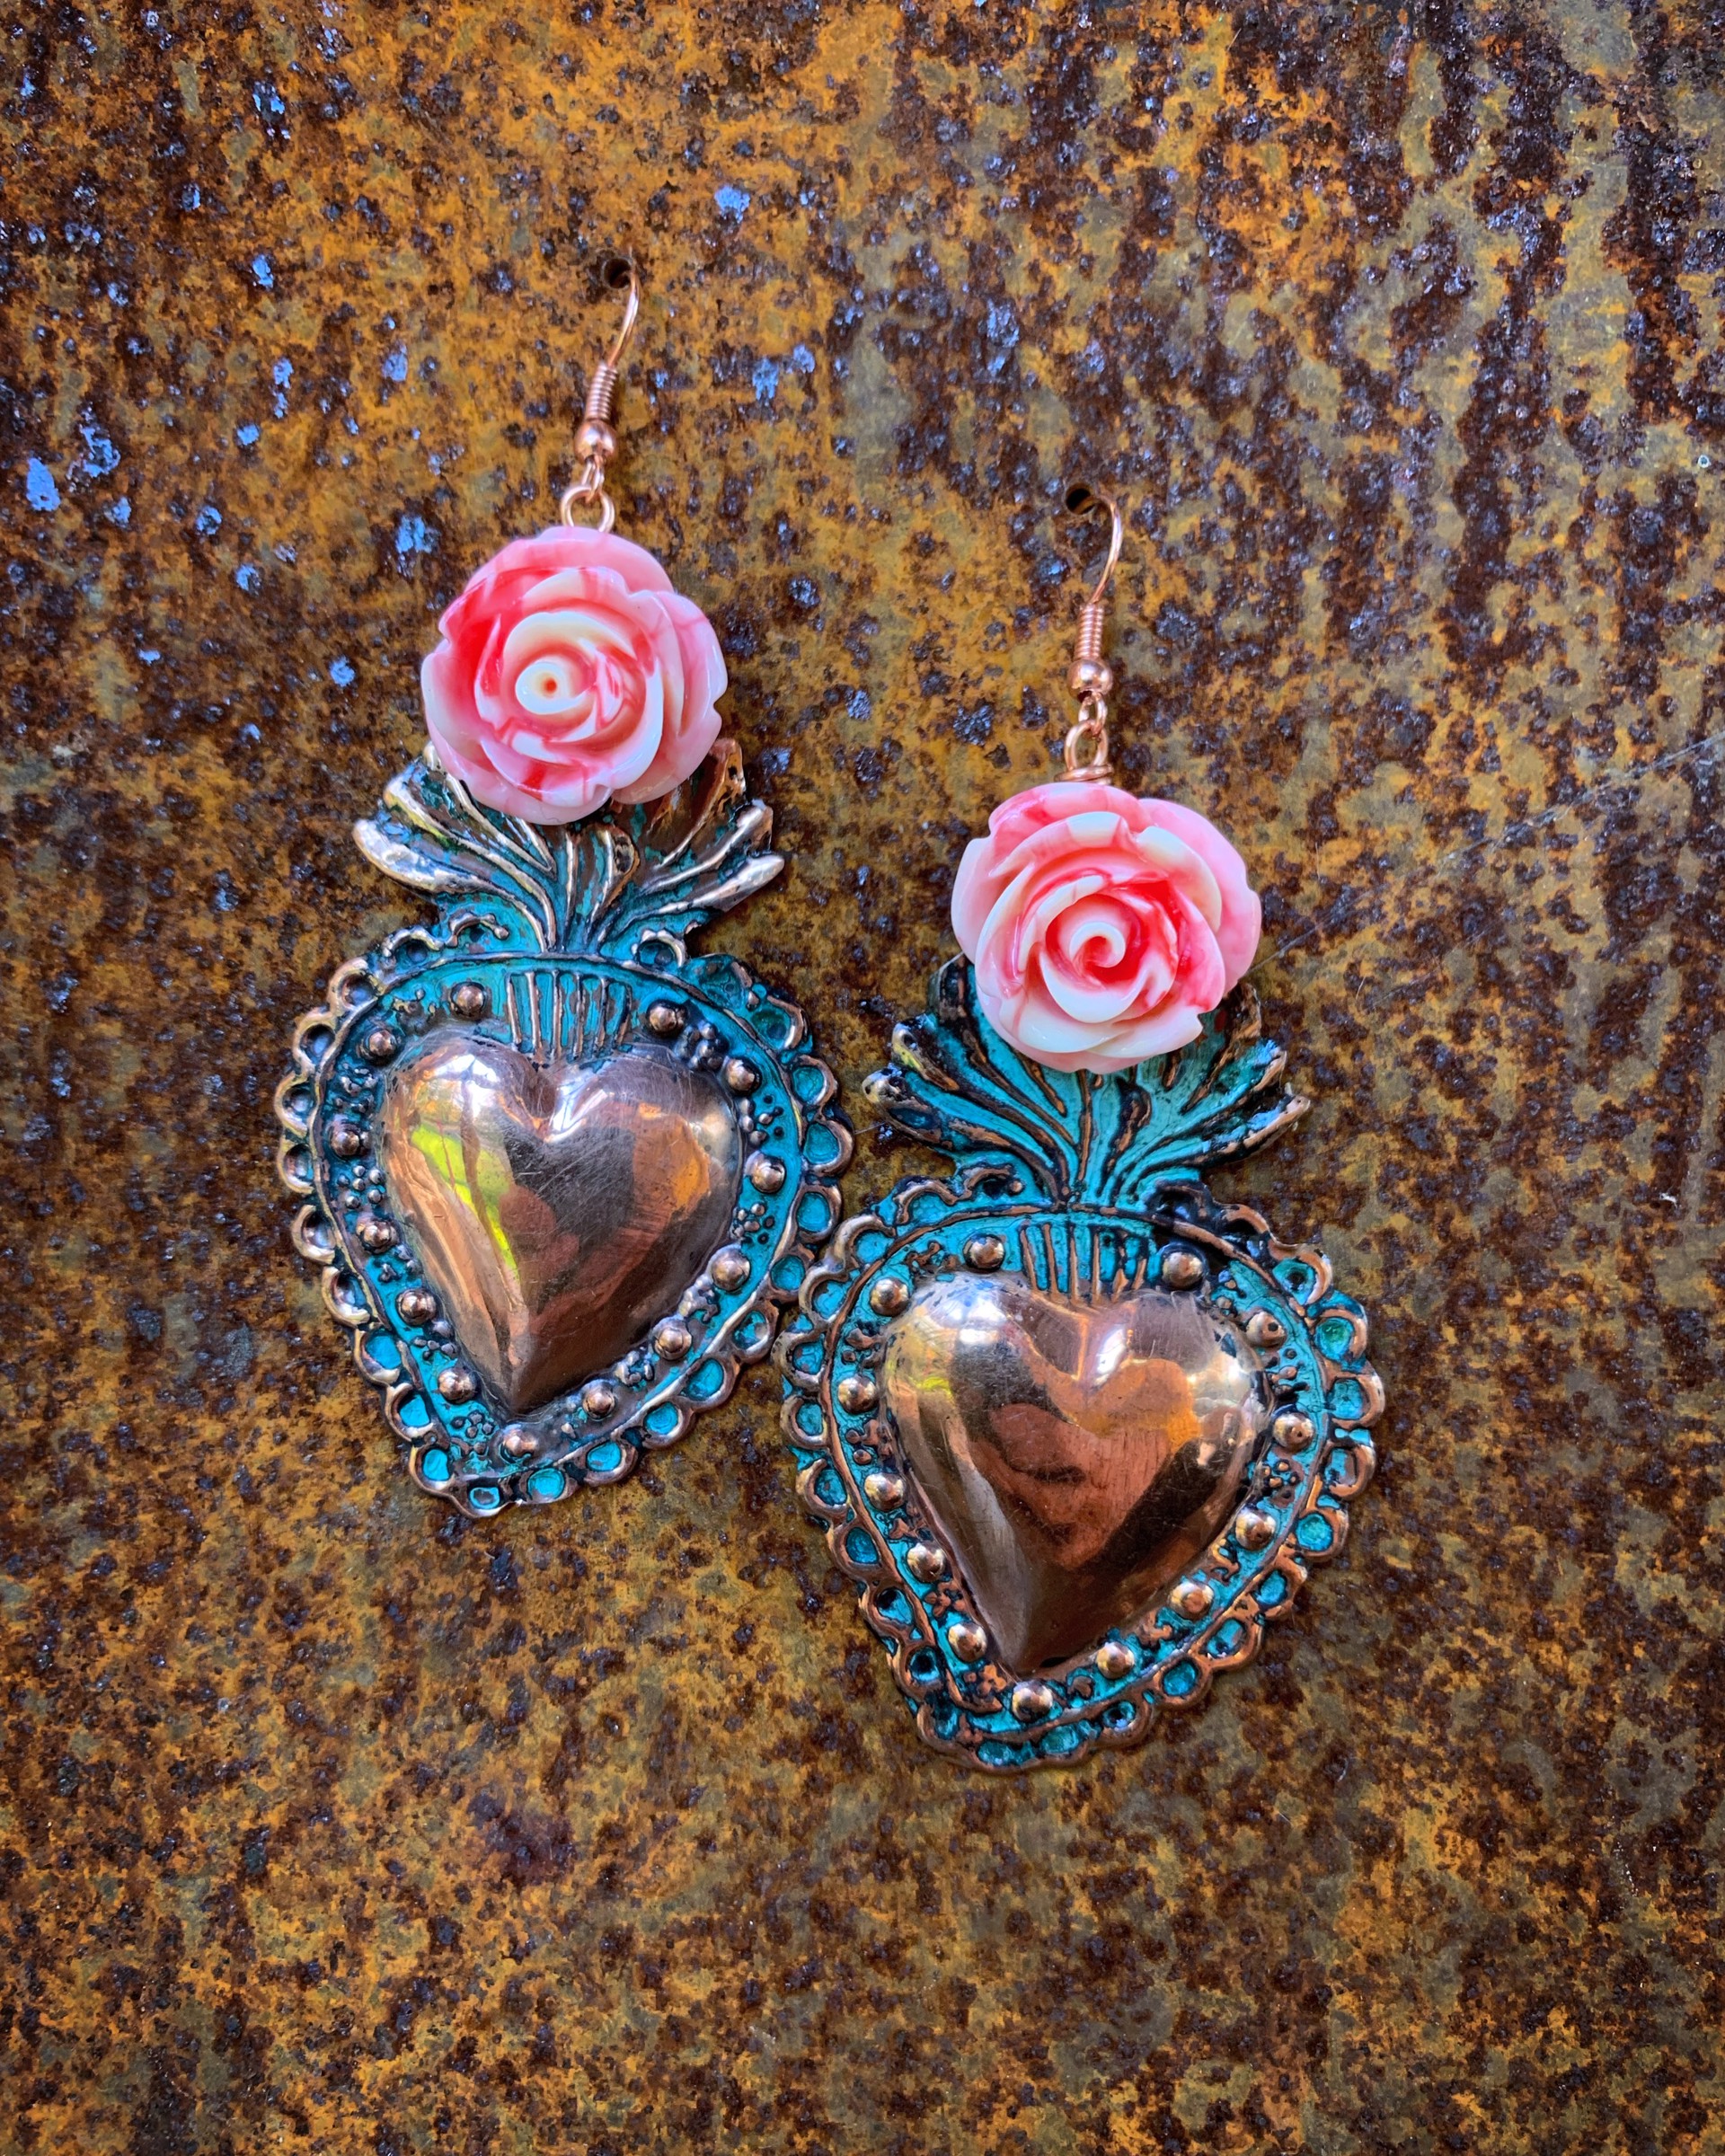 K508 Sacred Hearts with White and Pink Roses by Kelly Ormsby